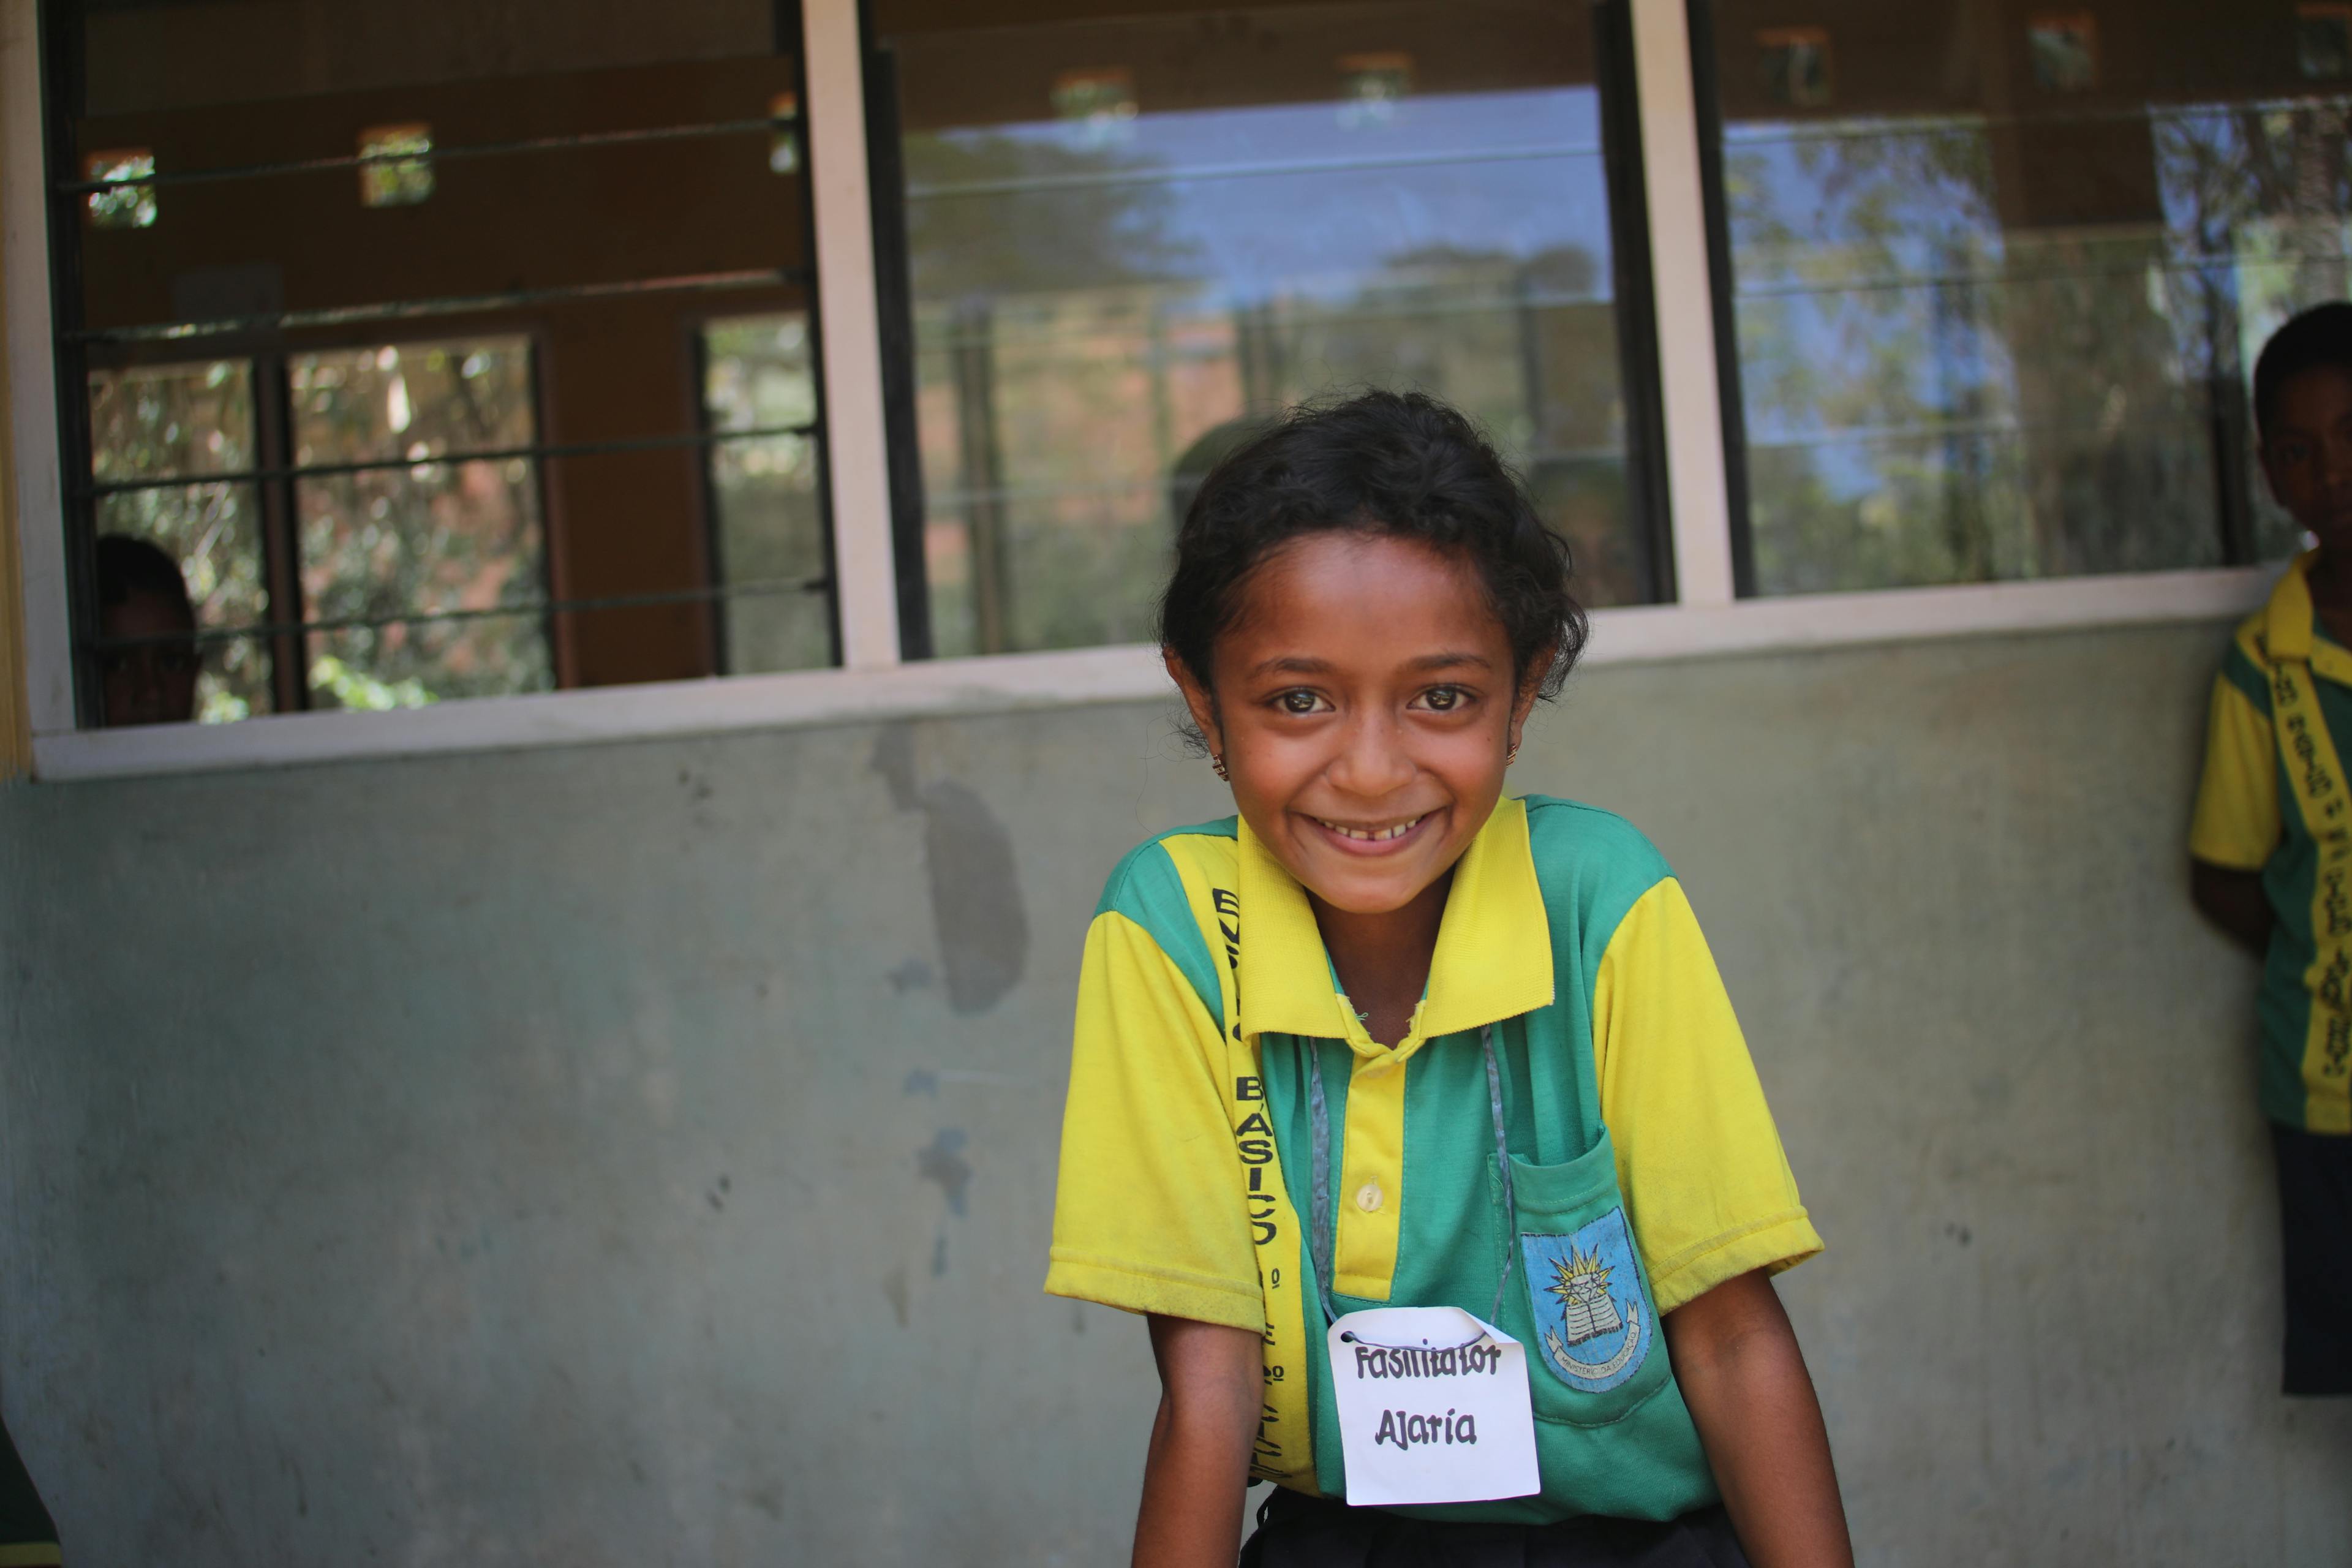 Ten-year-old Ajaria says her favourite school subject is religious education.